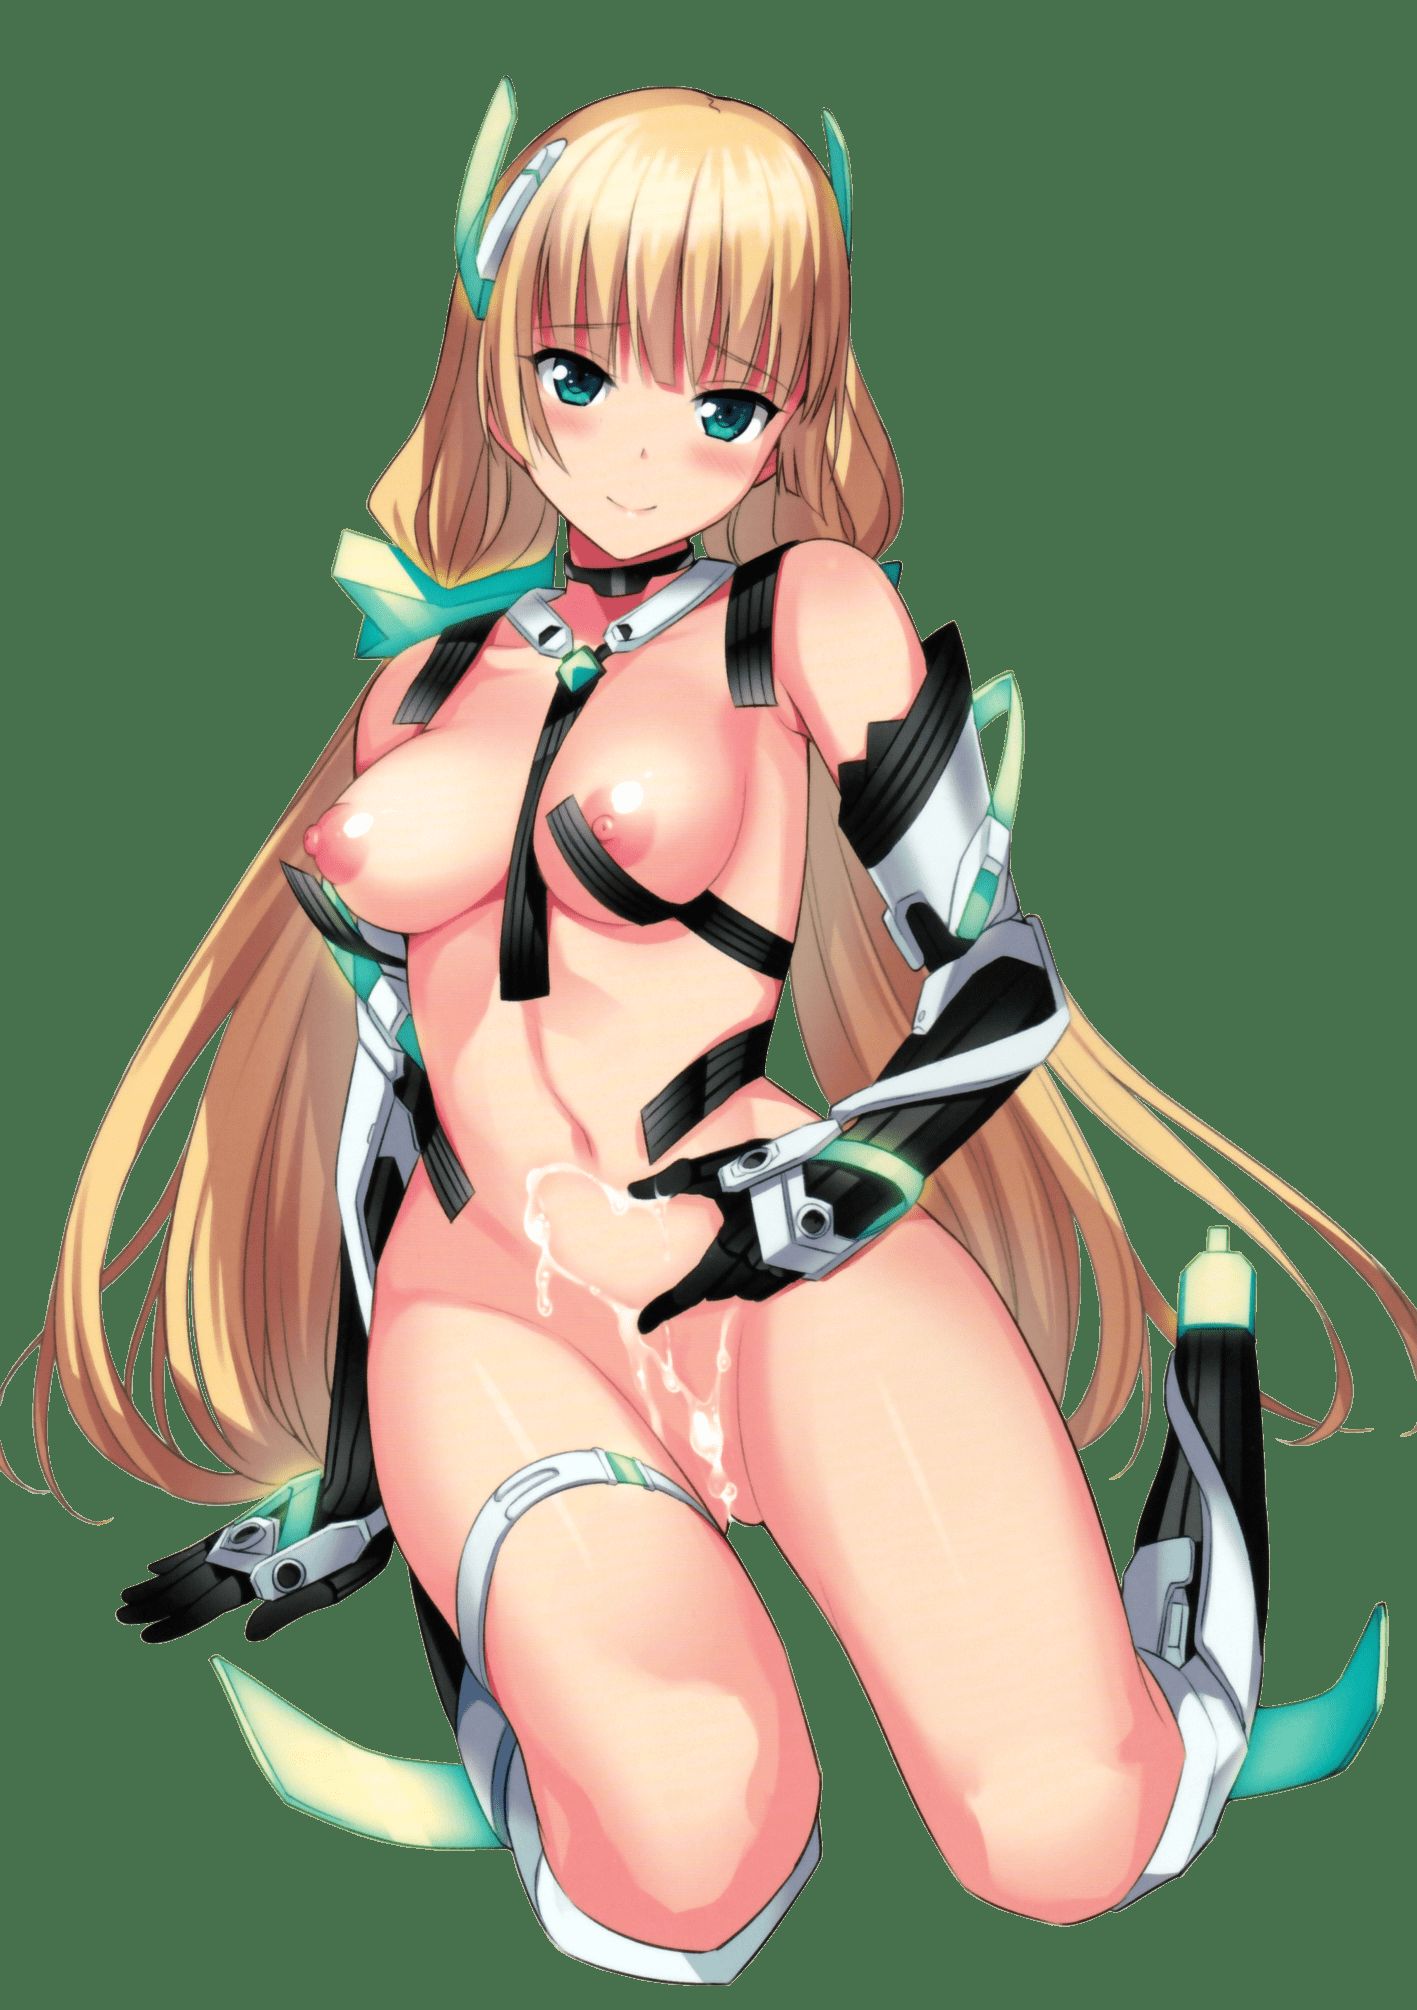 [Anime character material] png background, such as anime characters erotic image material 205 68